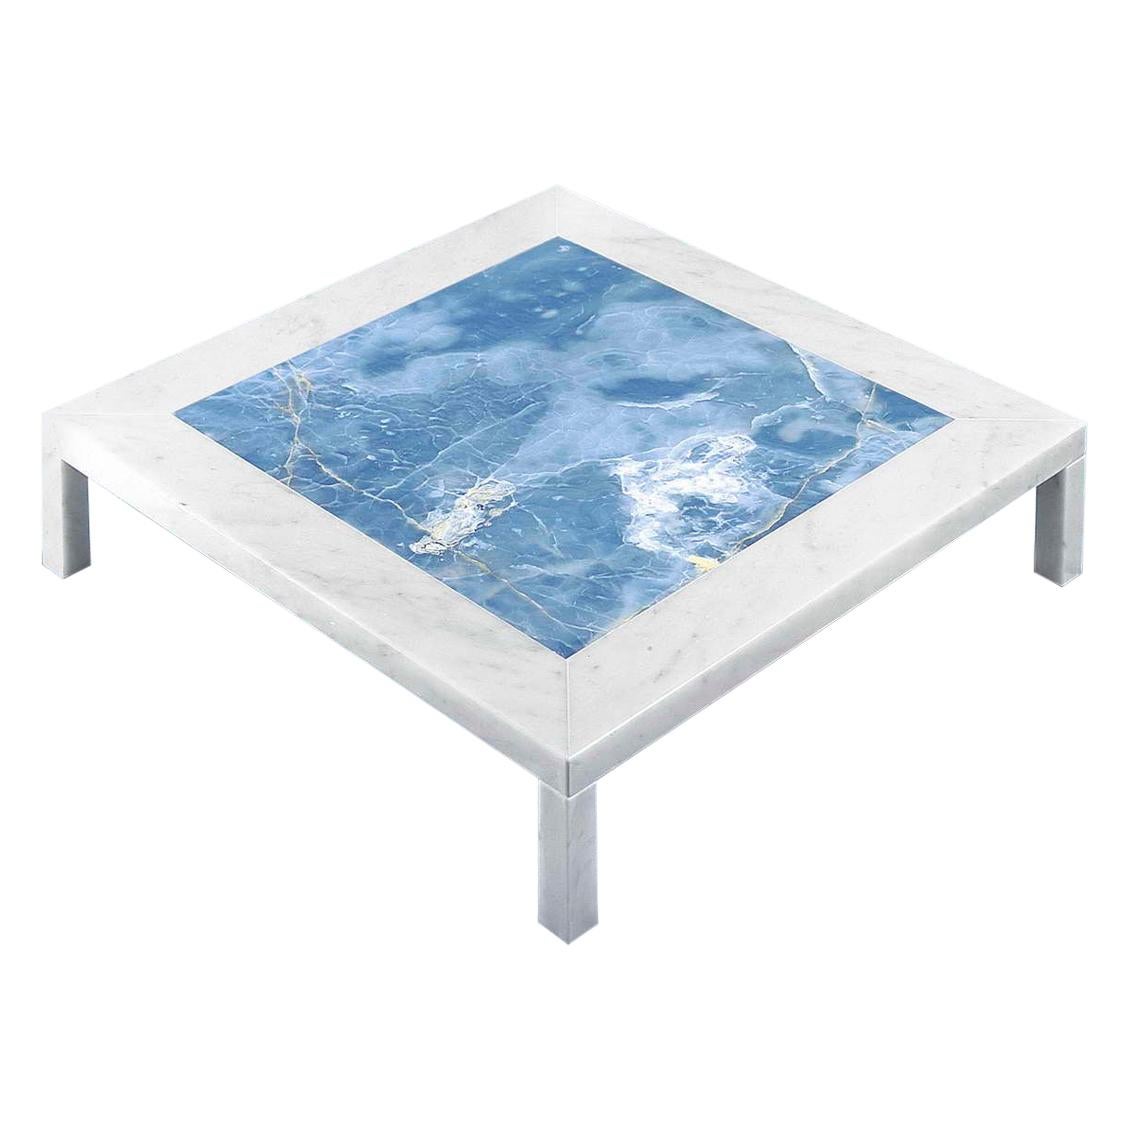 21st Century by Arch. M.Piva "FUMO" Square Marble Table in White P. & Blu Onix